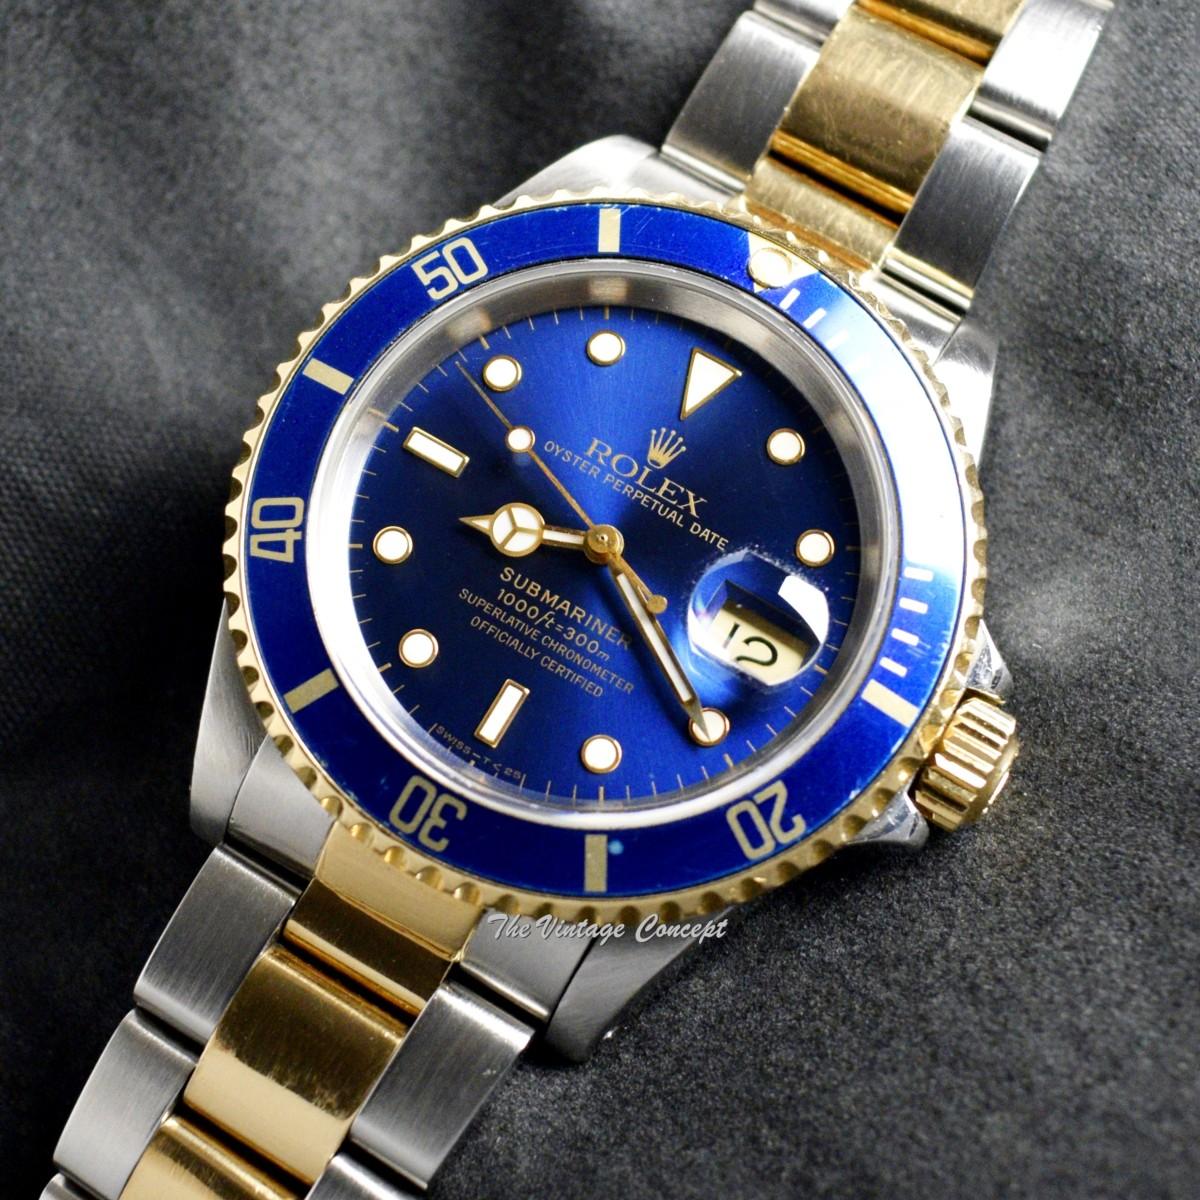 Rolex Submariner Two-Tone Steel Yellow Gold Blue Dial 16613 (SOLD)